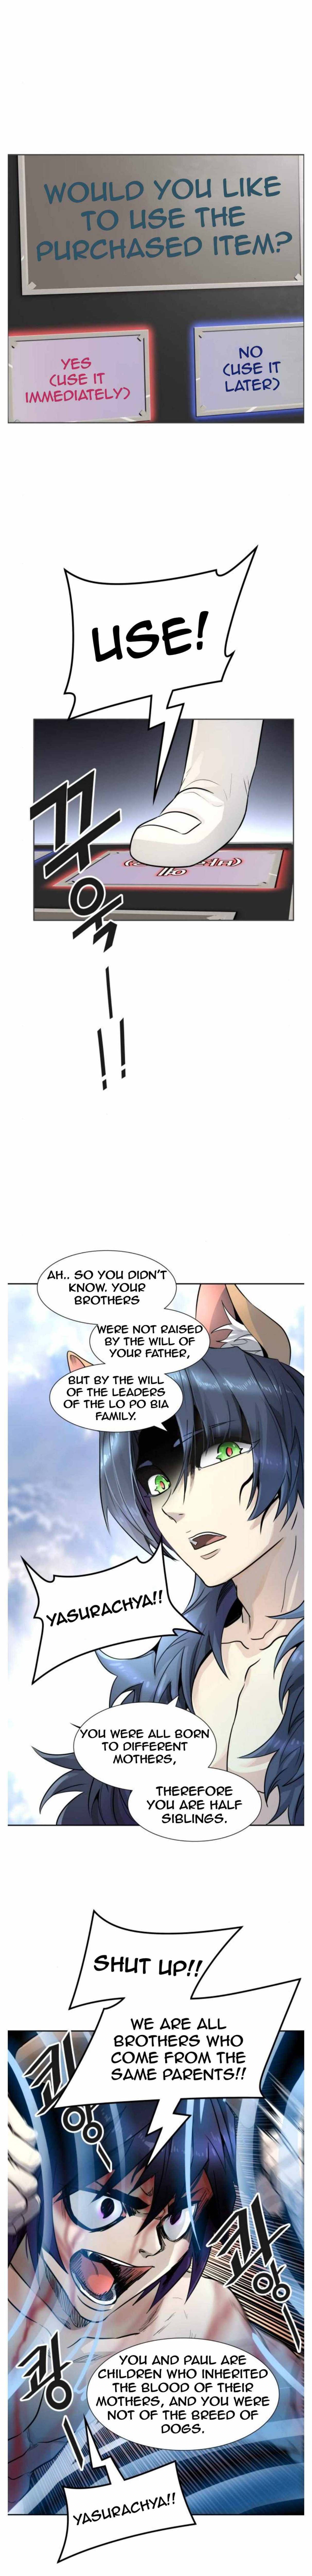 tower of god 501, tower of god 501, Read tower of god 501, tower of god 501 Manga, tower of god 501 english, tower of god 501 raw manga, tower of god 501 online, tower of god 501 high quality, tower of god 501 chapter, tower of god 501 manga scan